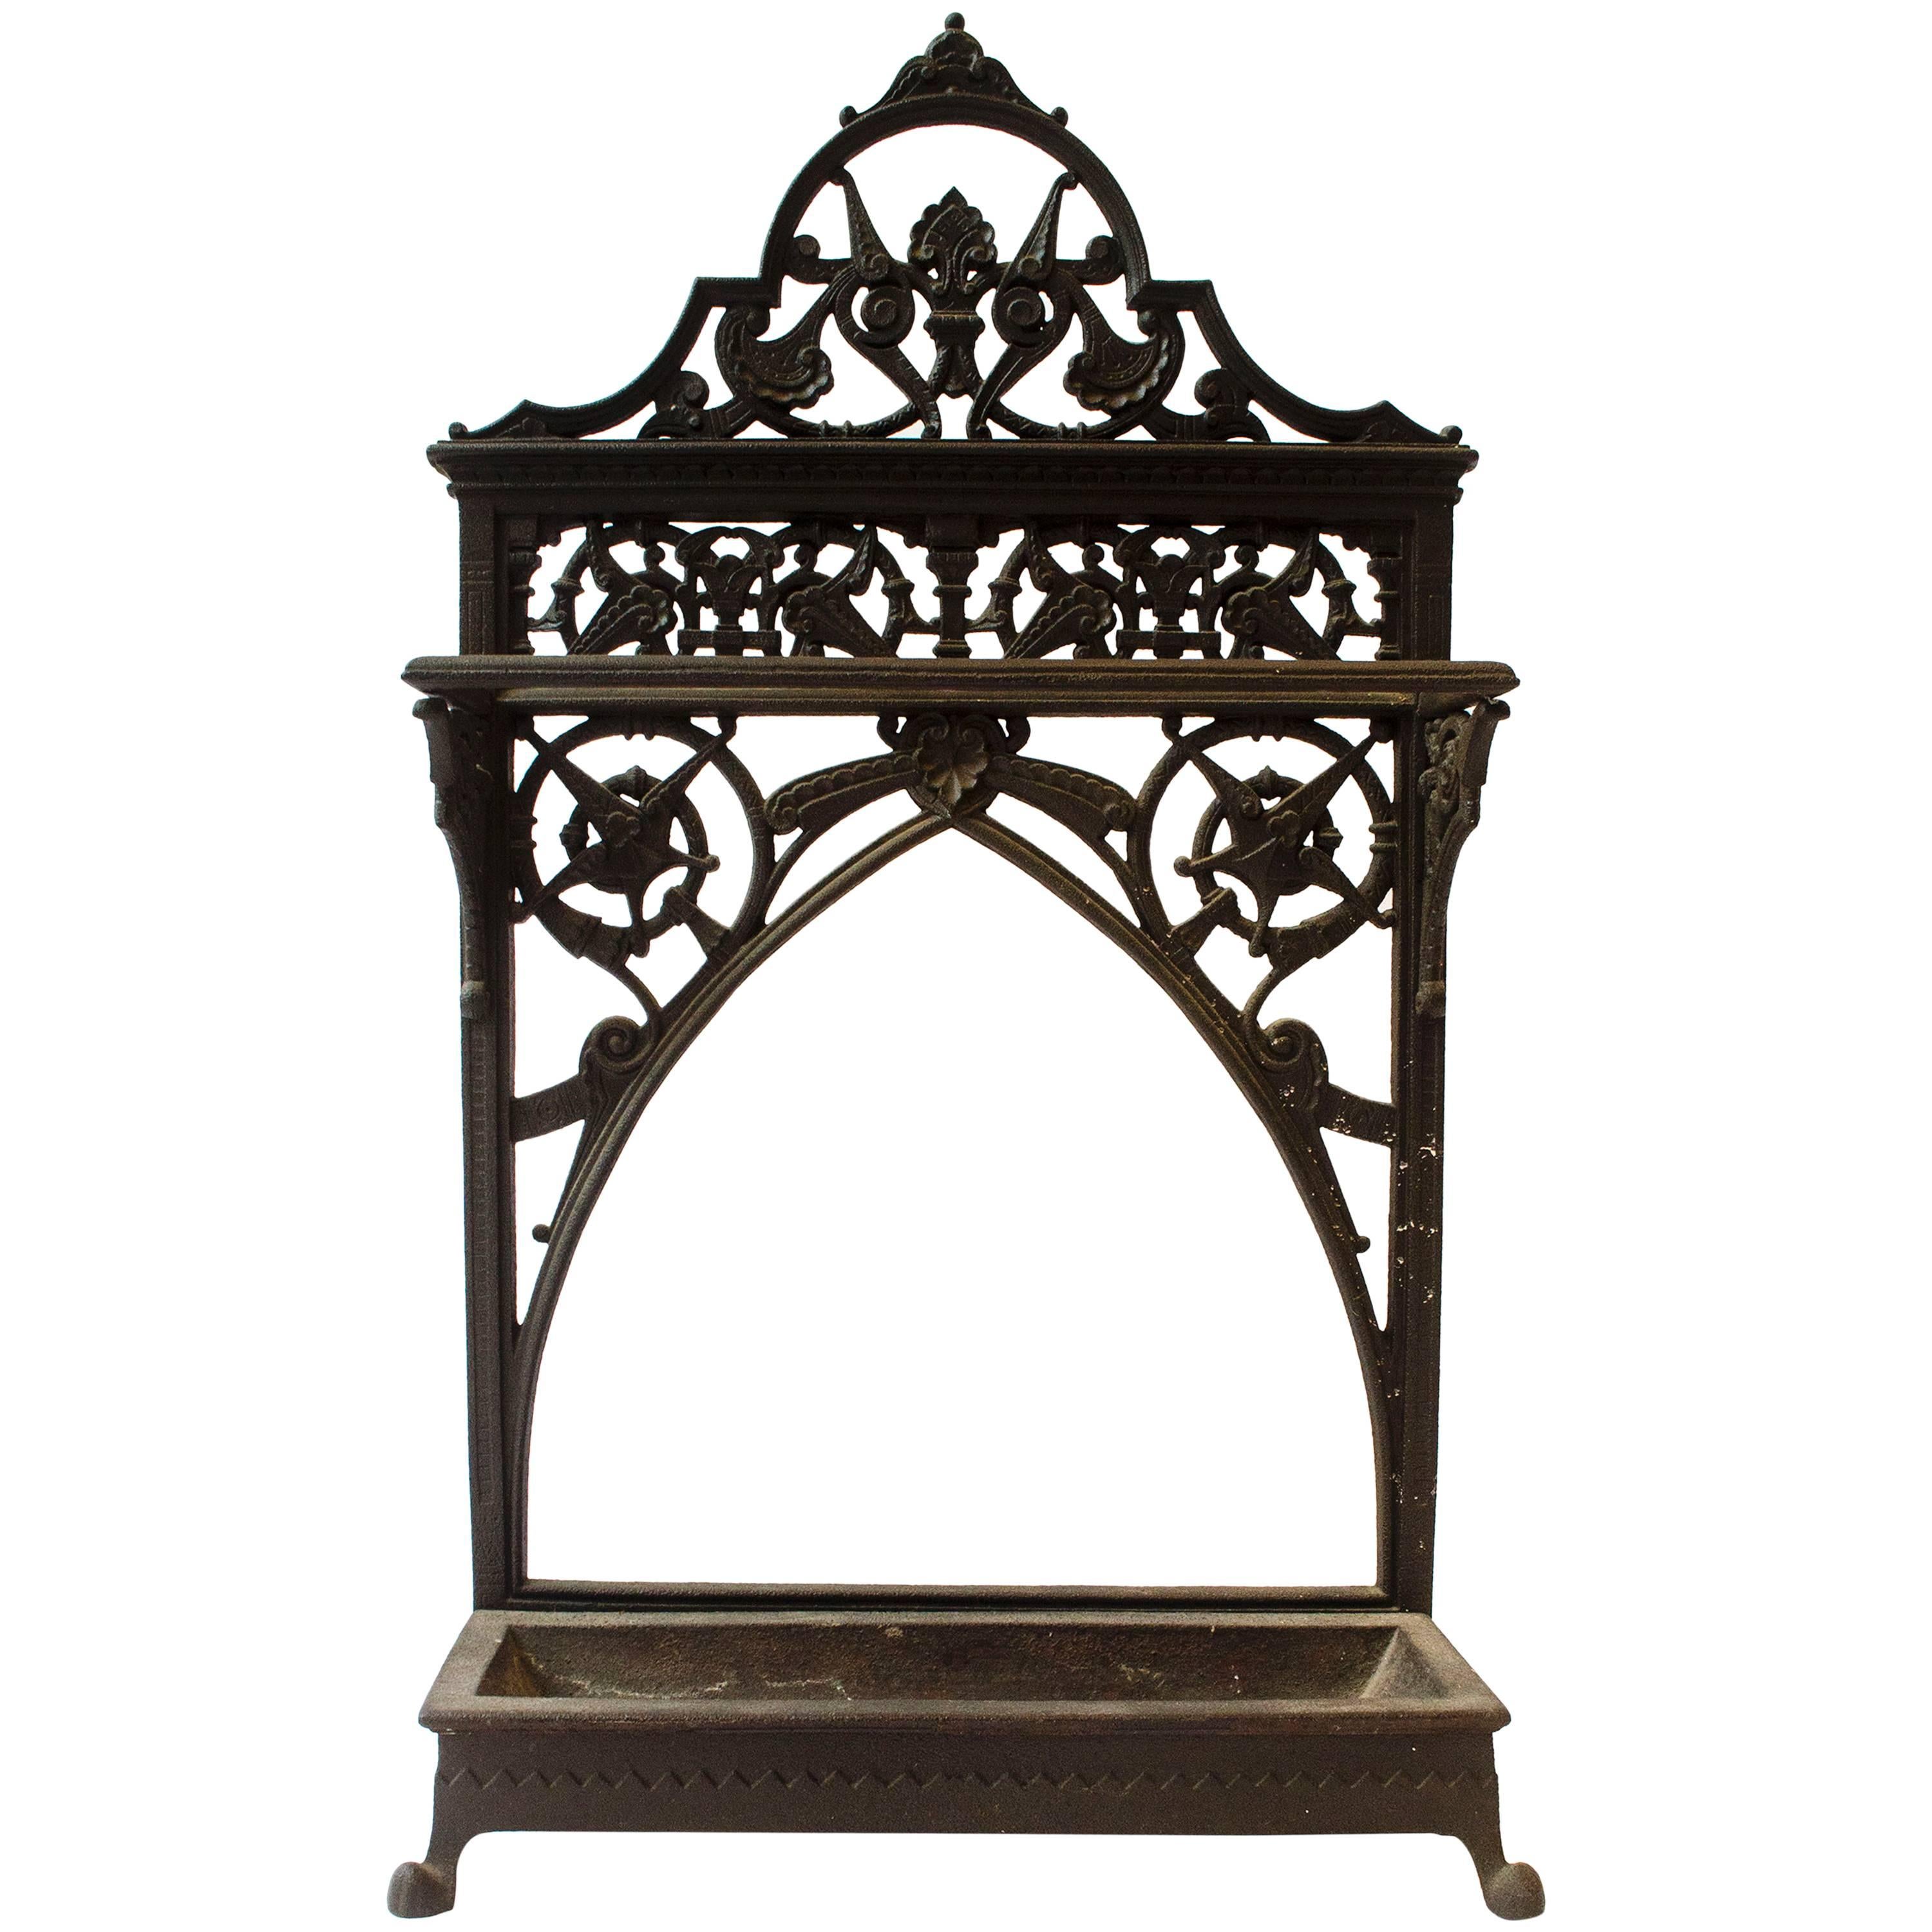 Dr C Dresser An Aesthetic Movement Cast Iron Stick Stand Made By Coalbrookdale im Angebot